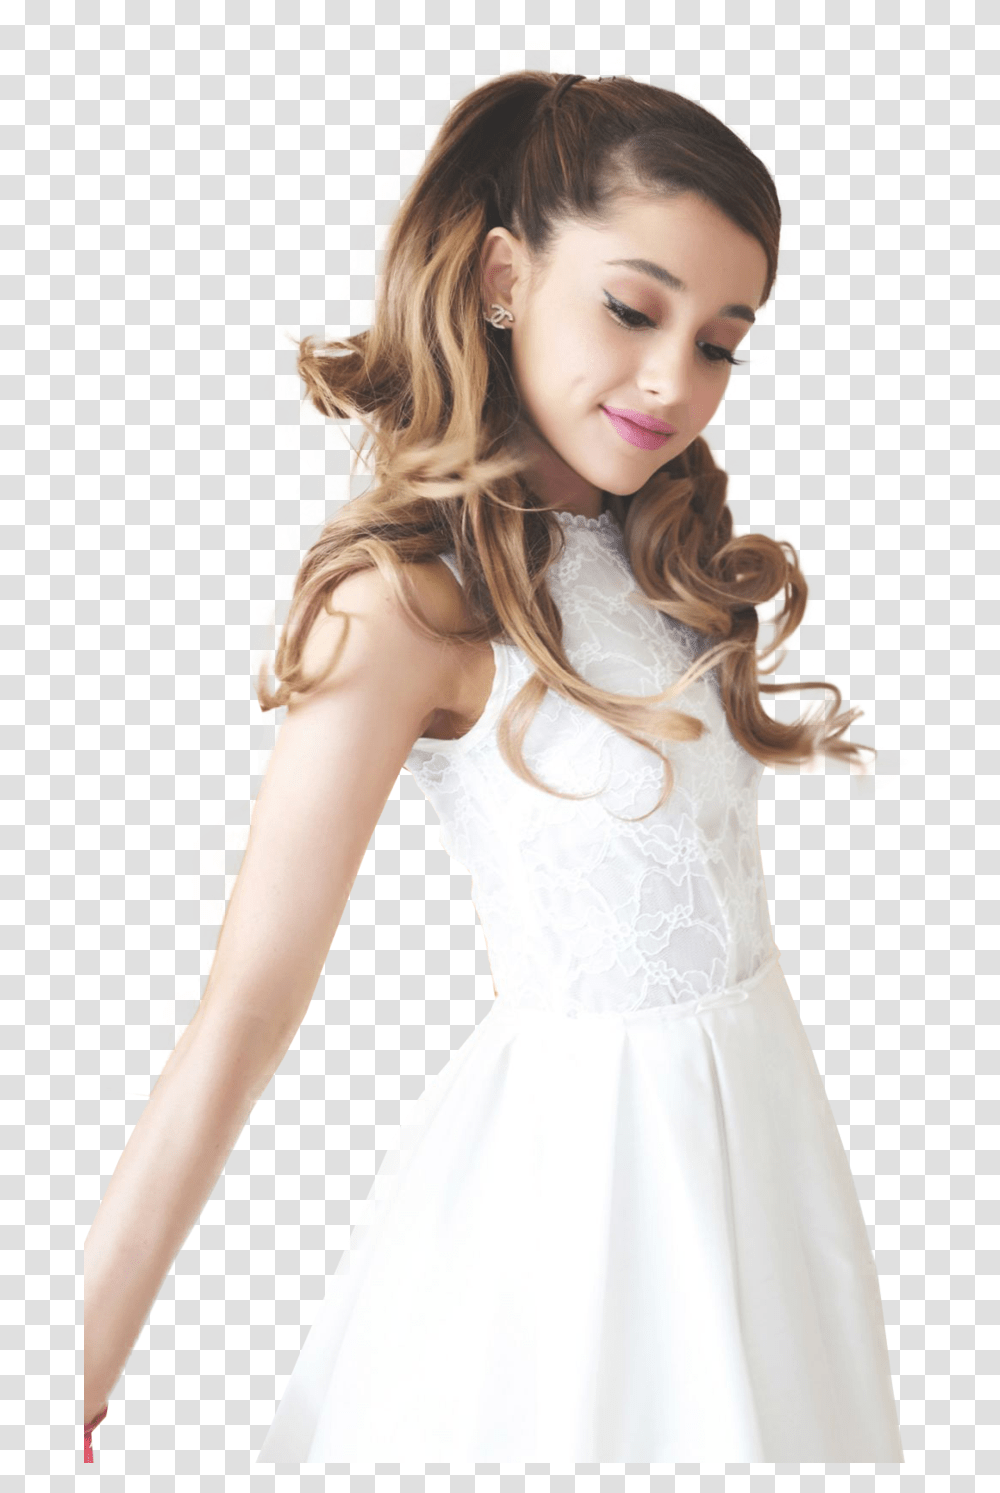 Ariana Grande Dress Photography Prom Cute Ariana Grande 2014, Wedding Gown, Robe, Fashion Transparent Png